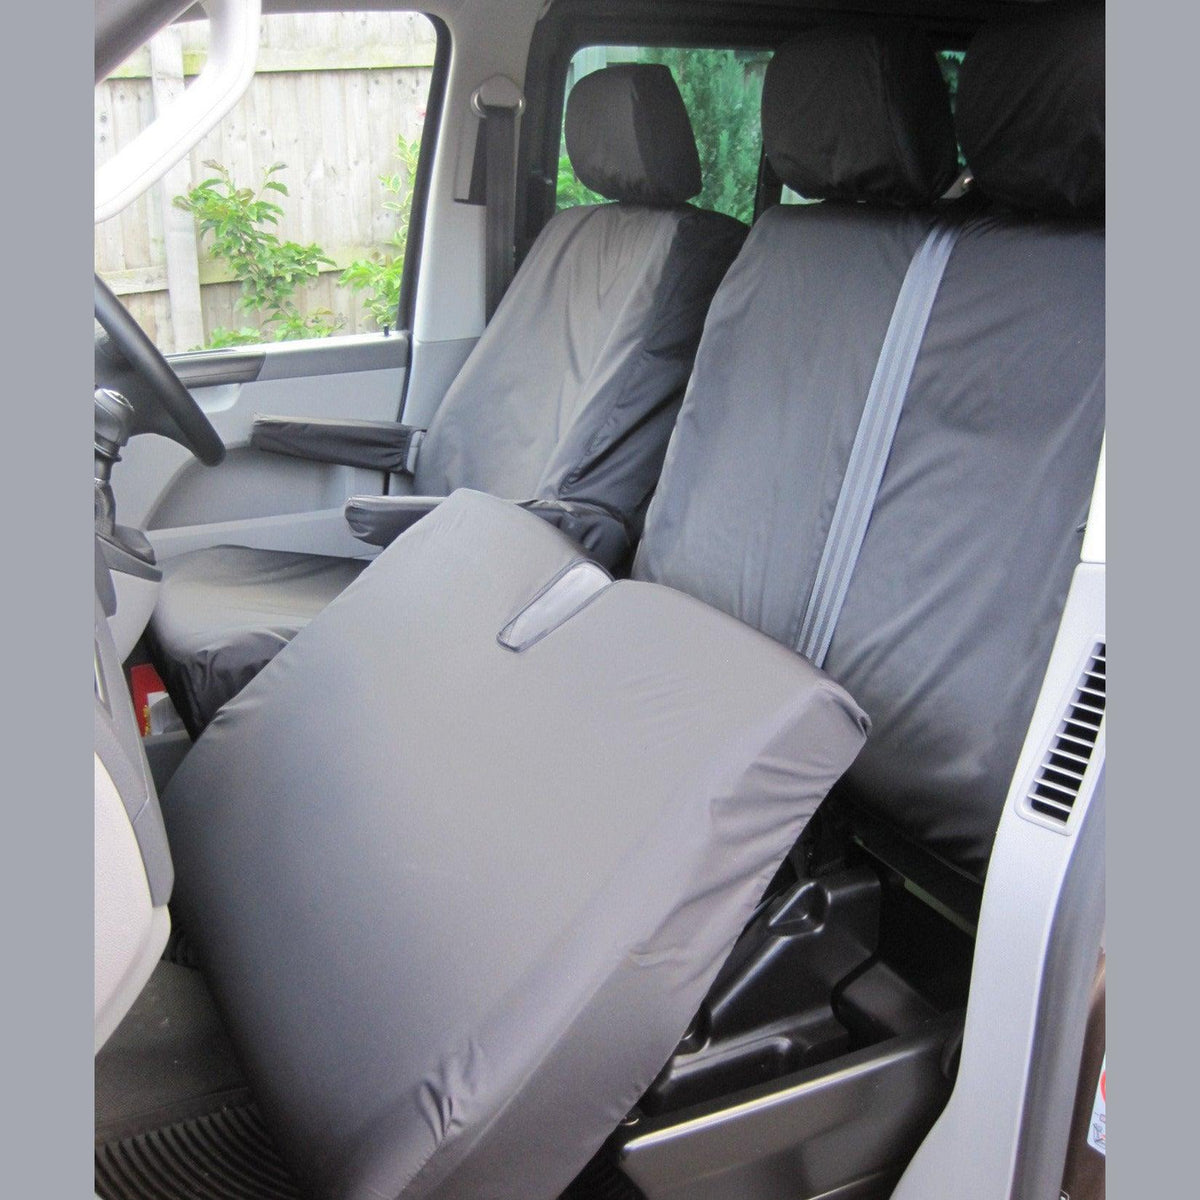 VW TRANSPORTER T5 T6 2010 ON - DRIVER AND FRONT DOUBLE PASSENGER SEAT COVERS – BLACK - Storm Xccessories2